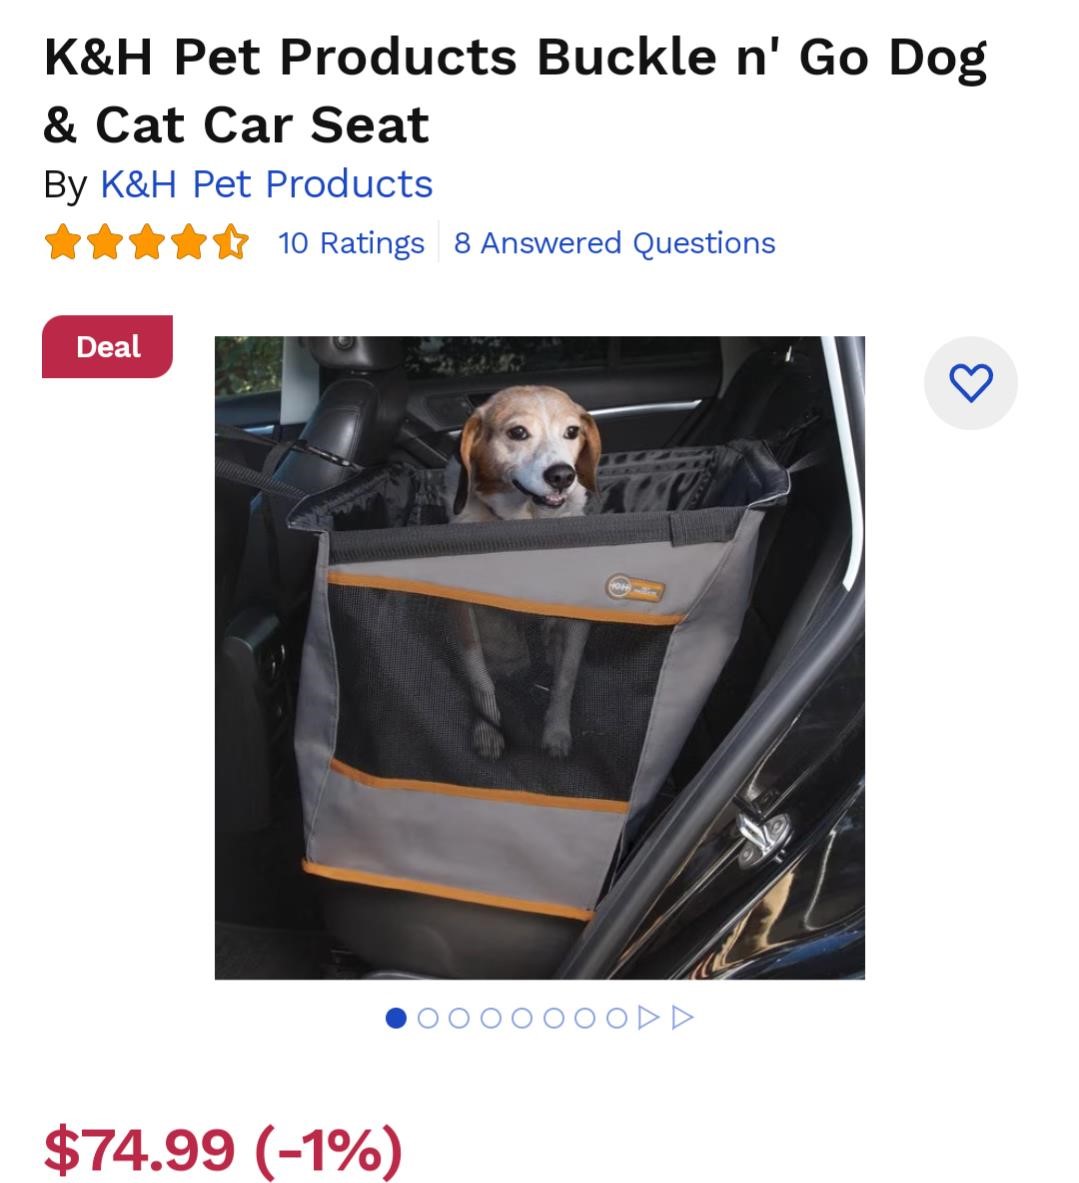 K&H Pet Products Buckle n' Go Dog & Cat Car Seat